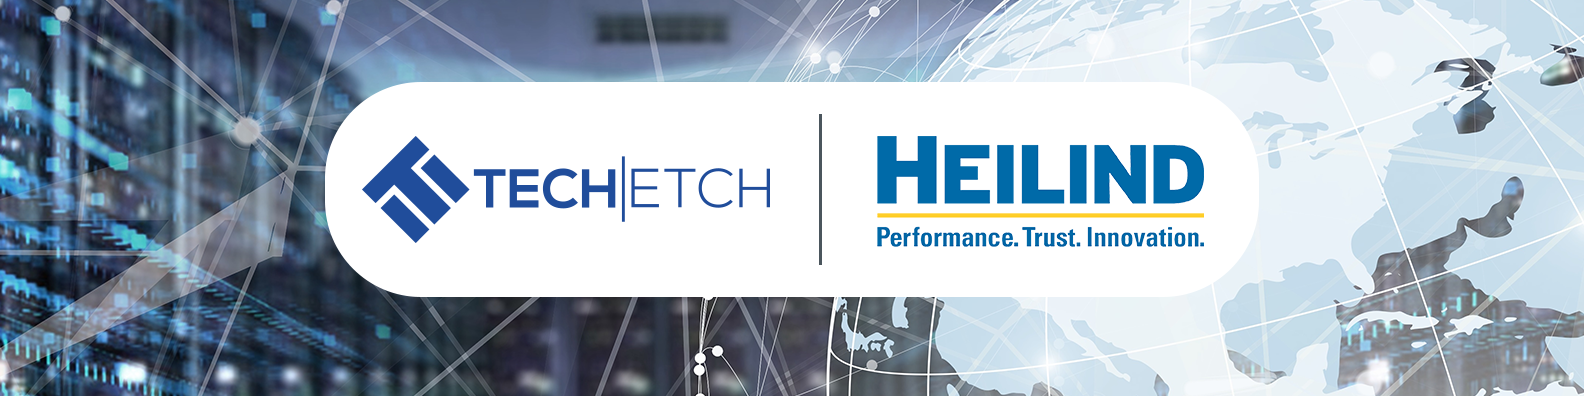 Tech Etch and Heilind Partner for Global Distribution of Shielding Solutions